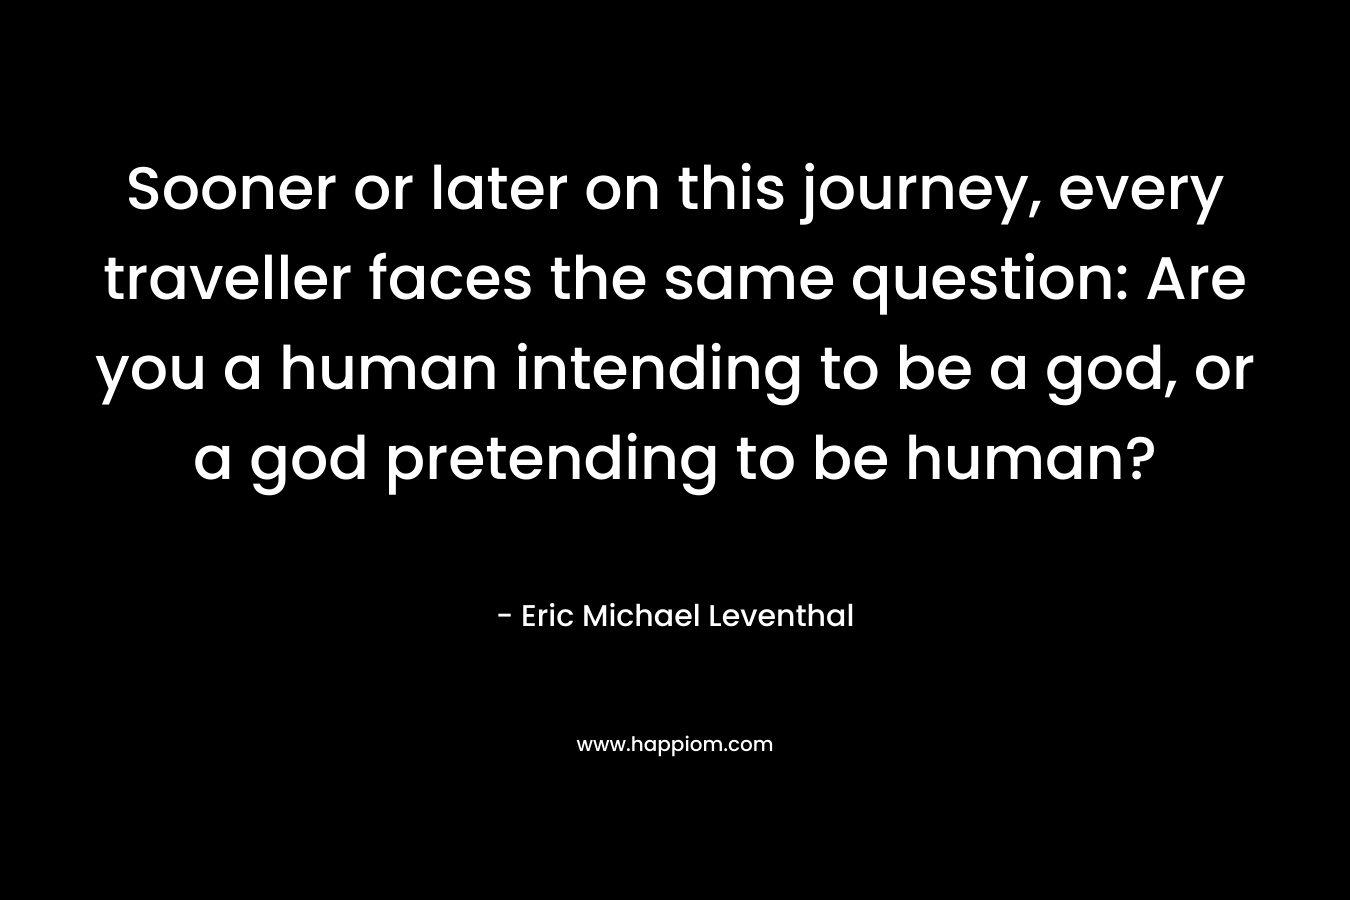 Sooner or later on this journey, every traveller faces the same question: Are you a human intending to be a god, or a god pretending to be human?